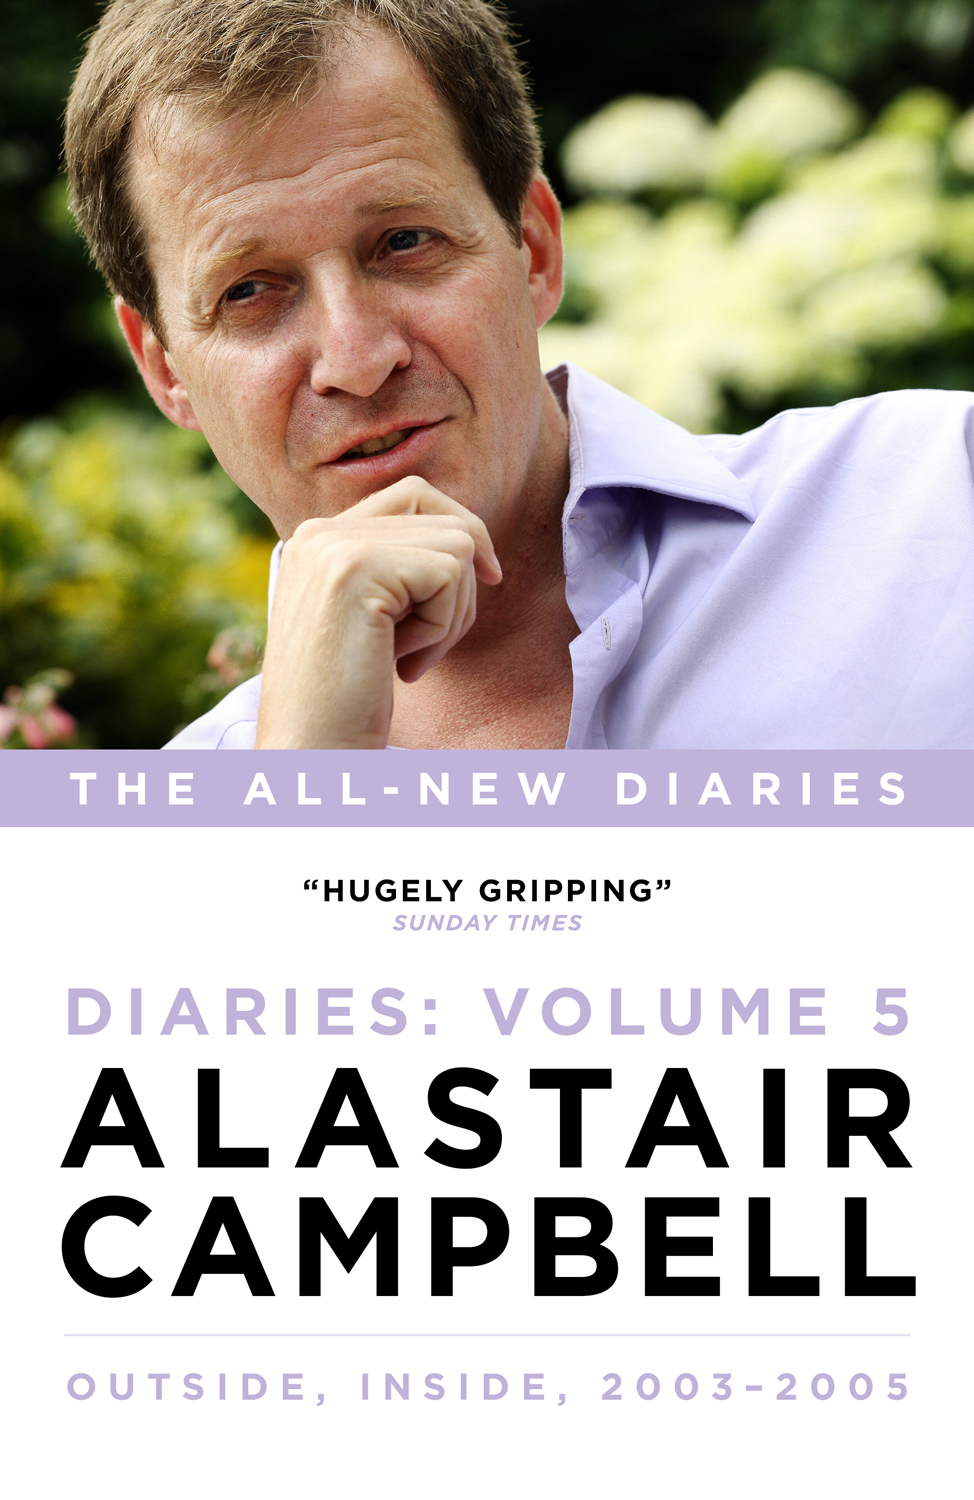 Outside, Inside 2003-2006, Diaries Volume 5, by Alastair Campbell